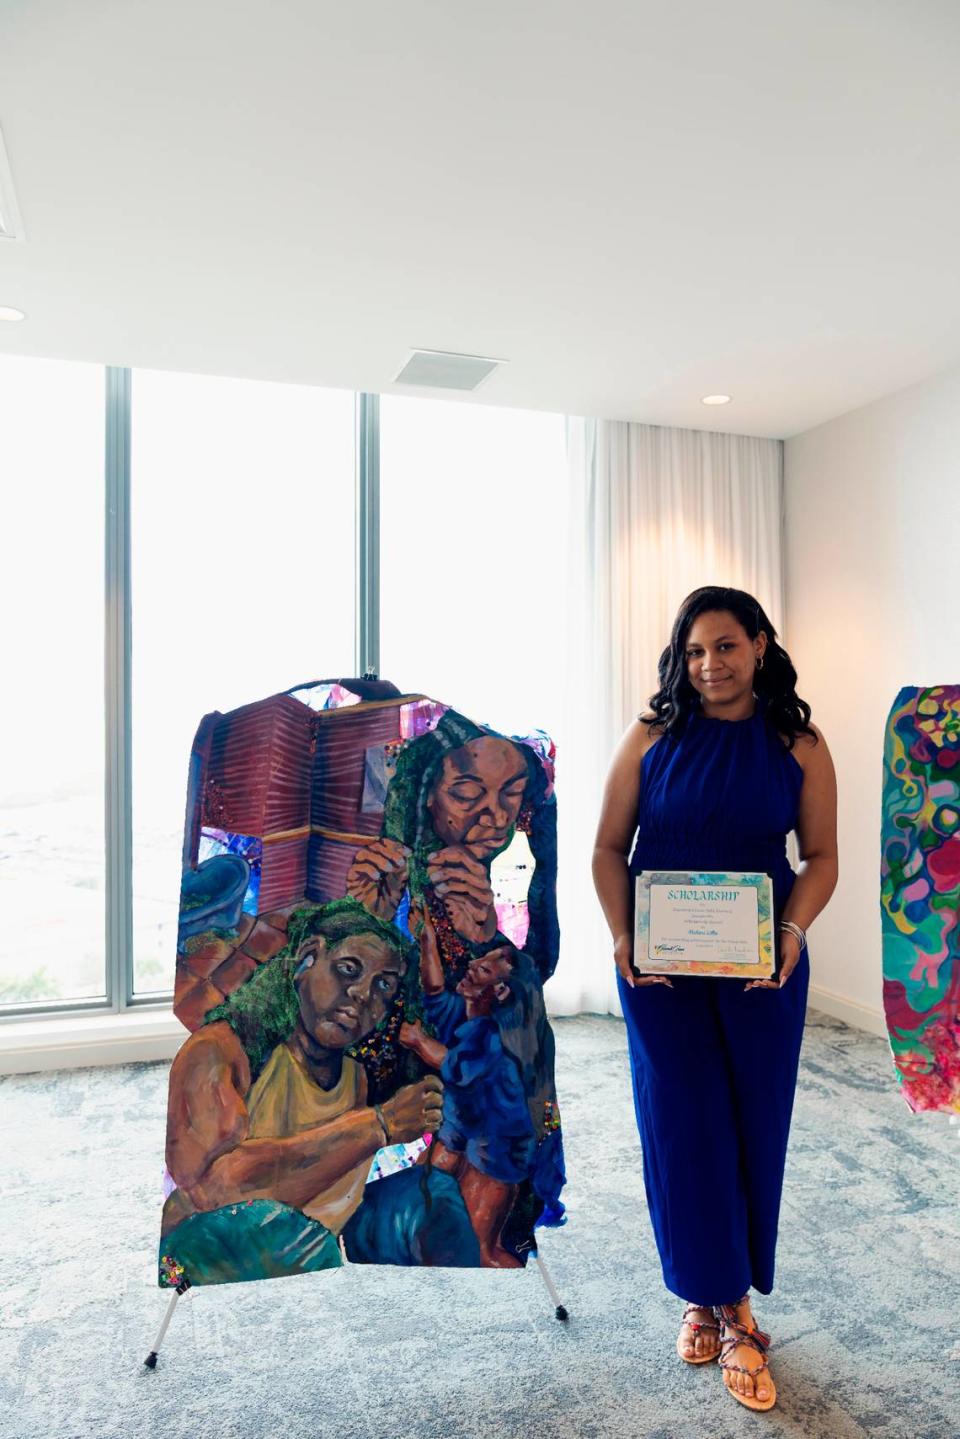 Ashani Lillie, a graduate of New World School of the Arts, is one of the winners in the Coconut Grove Arts Festival Scholarship program. She will attend Rhode Island School of Design.